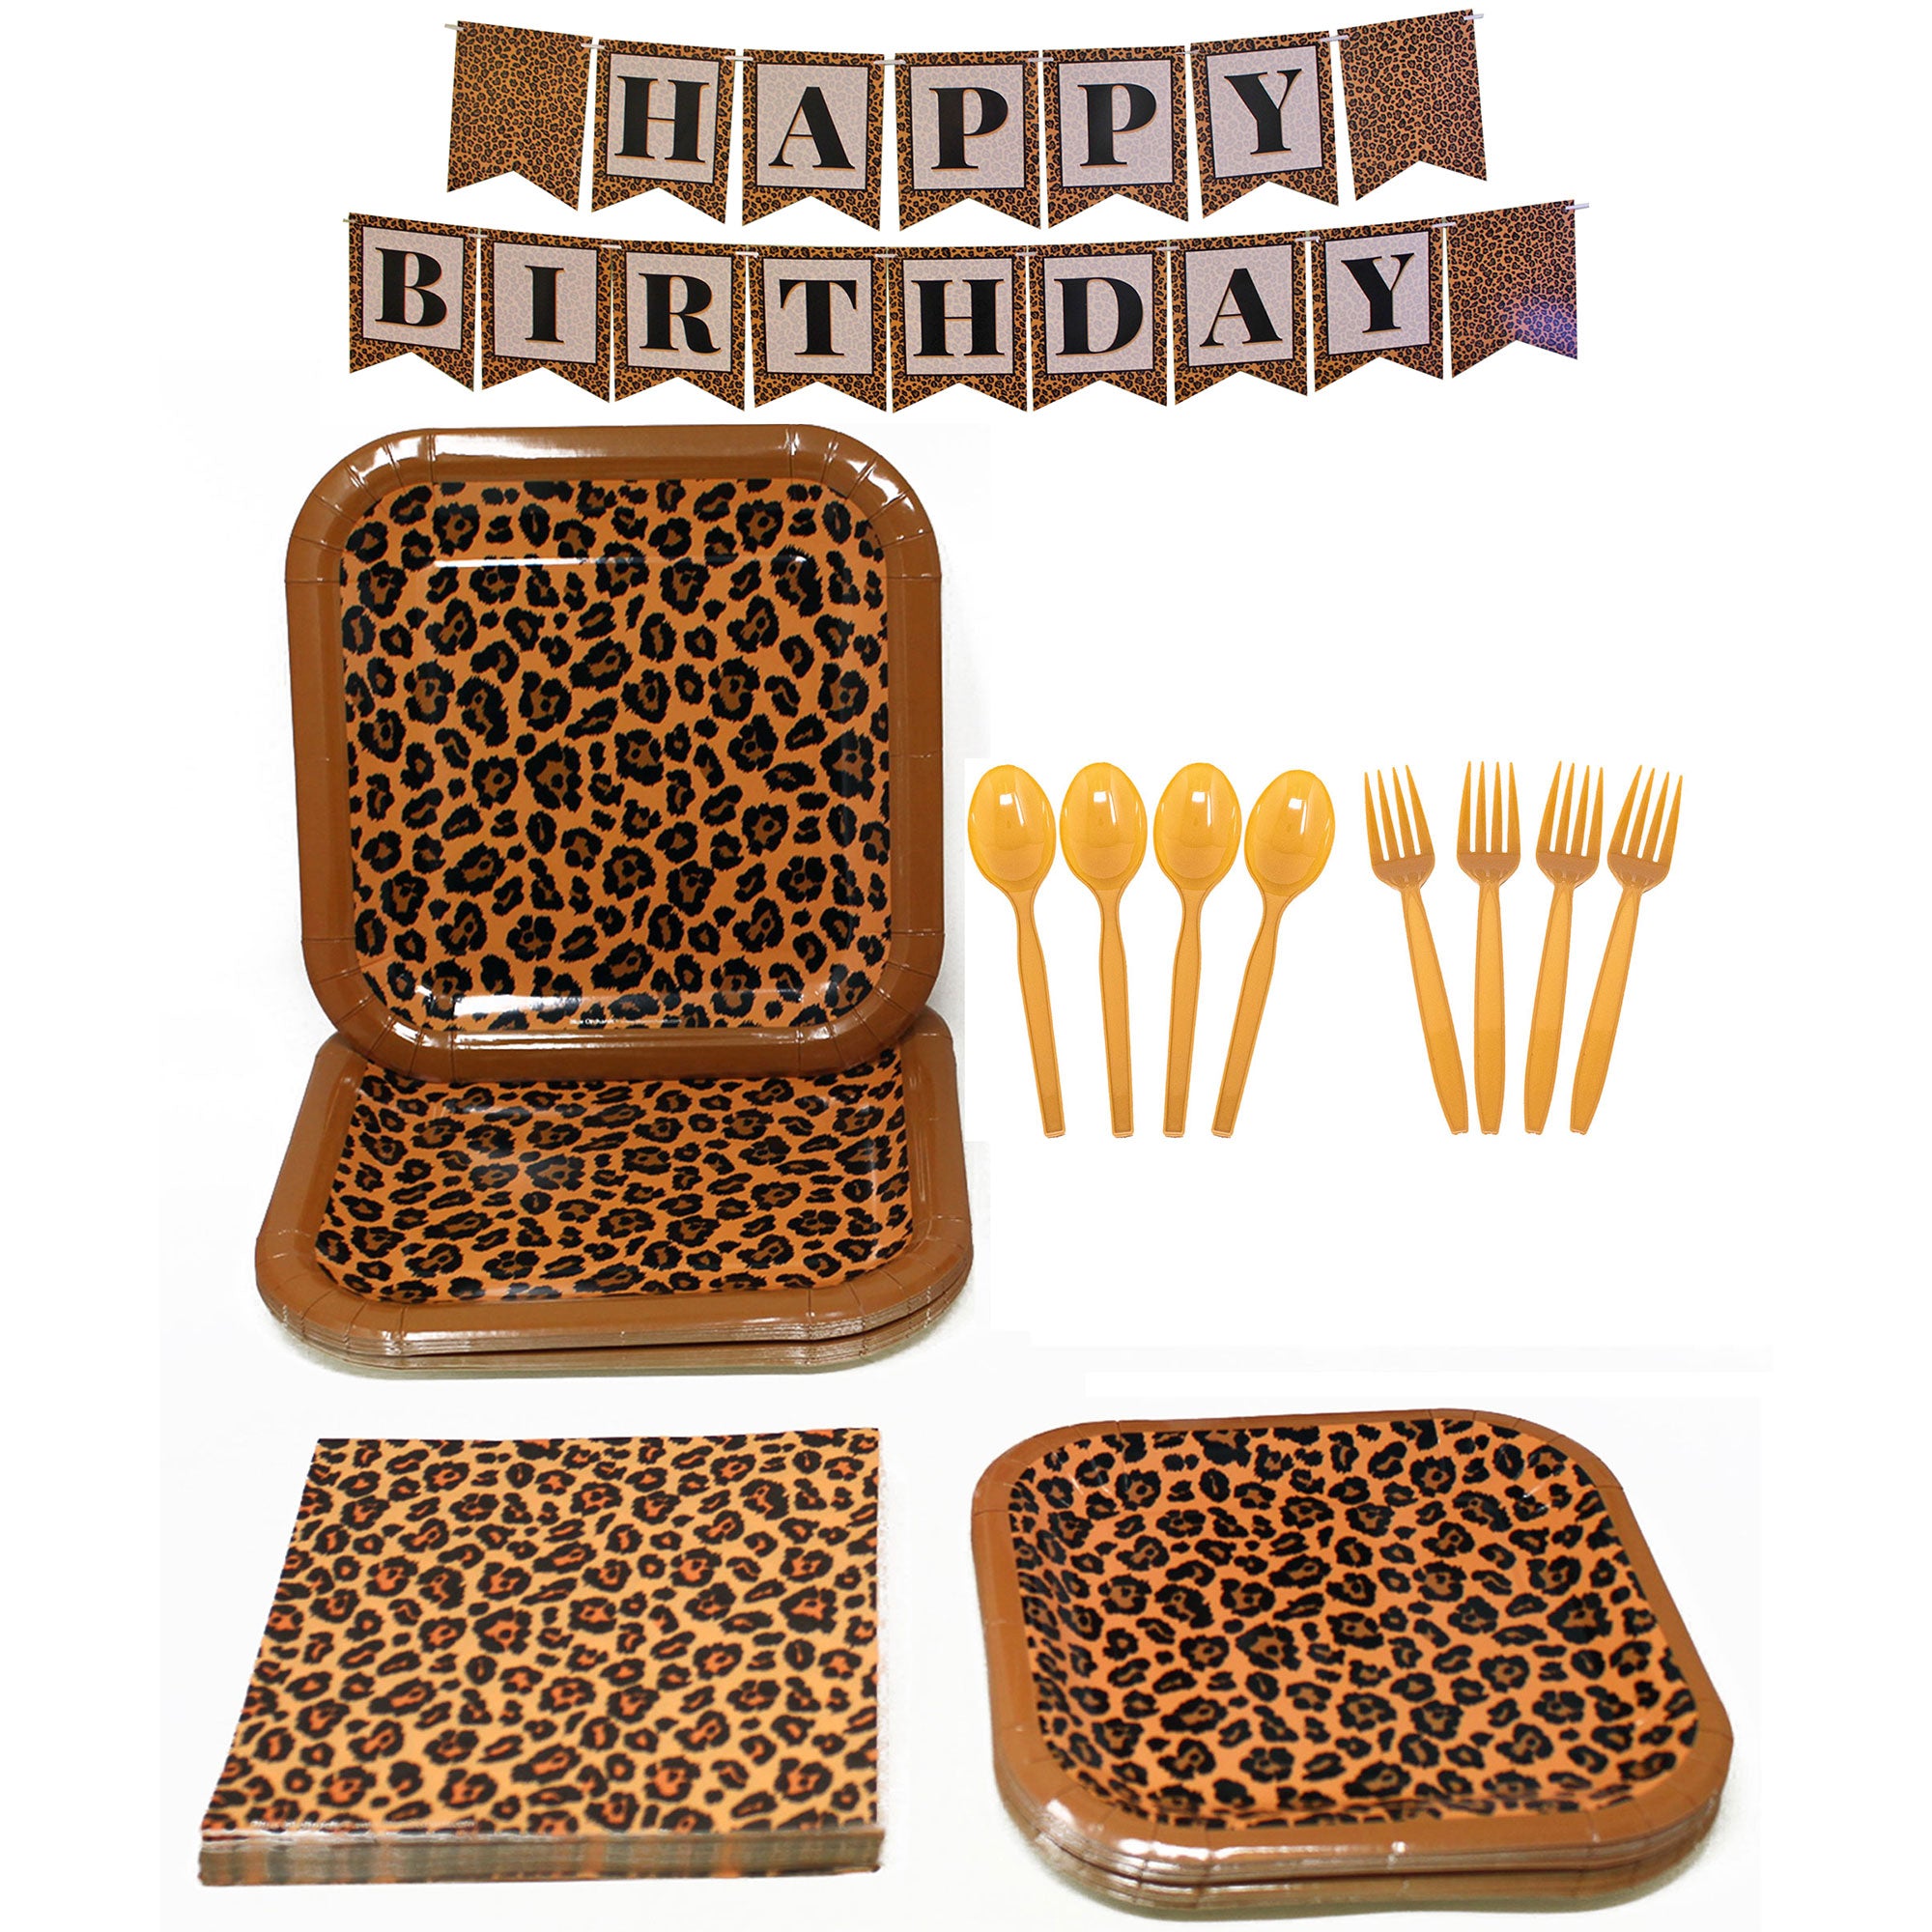 jungle theme party supplies jungle theme baby shower decor animal print tablecloth jungle party decorations animal print party plates jungle banner birthday jungle table cloths for parties jungle theme party plates lion king party supplies jungle theme birthday decorations zoo animal plates jungle plates and napkins jungle plates plastic jungle tablecloth jungle theme party supplies baby shower leopard plates zoo party plates and napkins jungle party supplies